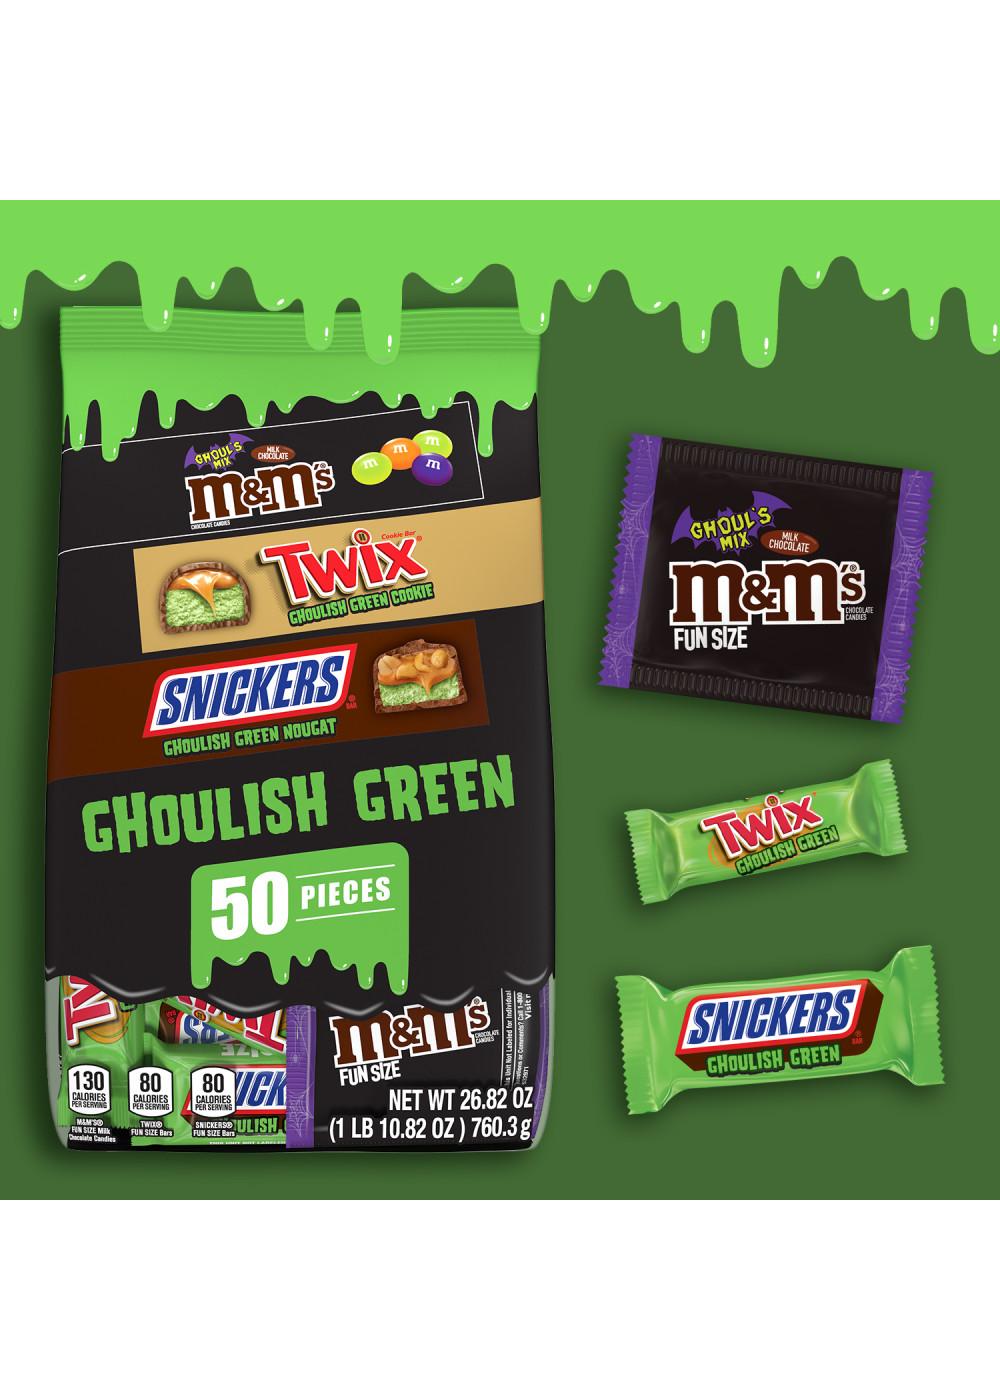 M&M'S Mad Scientist Mix Chocolate Halloween Candy - Shop Candy at H-E-B